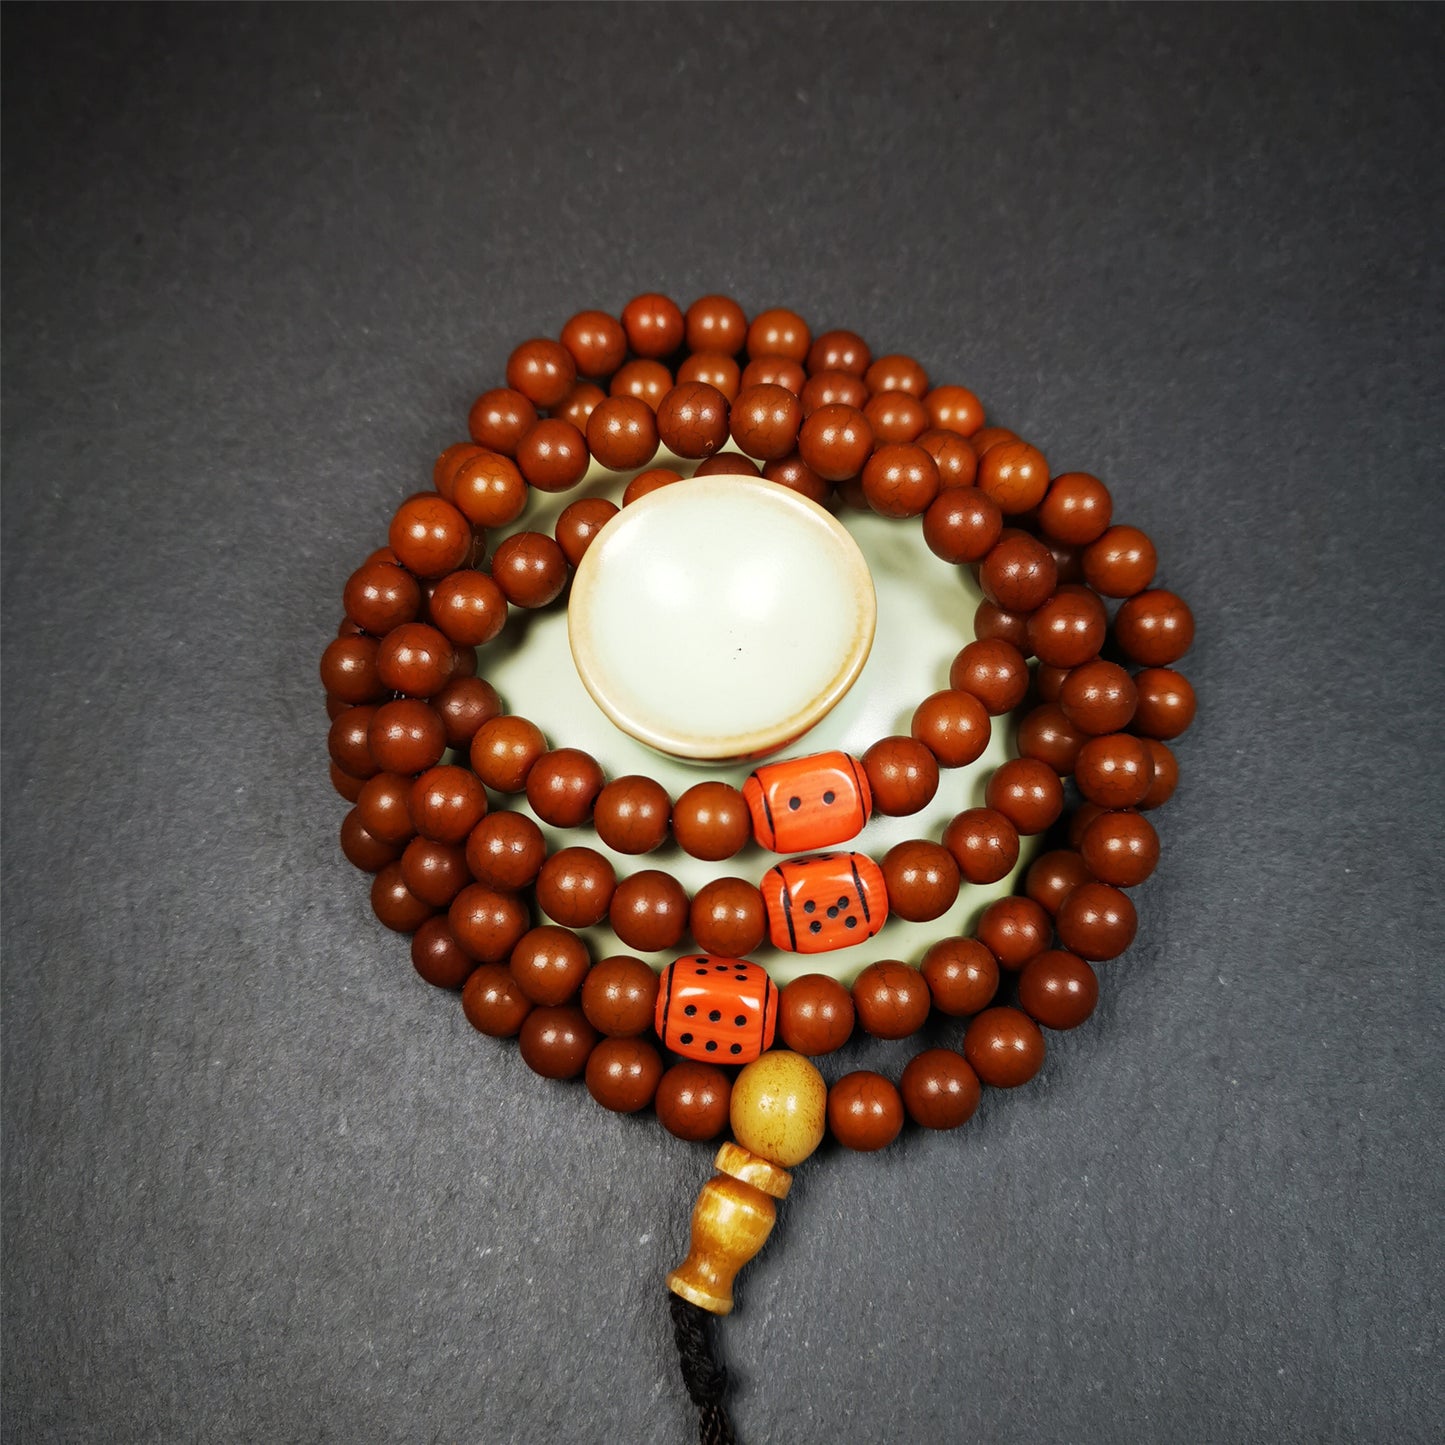 This mala was made by Tibetan craftsmen and come from Hepo Town, Baiyu County, the birthplace of the famous Tibetan handicrafts.  It is made of Corypha Linn Seeds, diameter of 8mm / 0.32",circumference is 90cm / 35" ,with 3 dice bead, end of a yak bone guru bead.